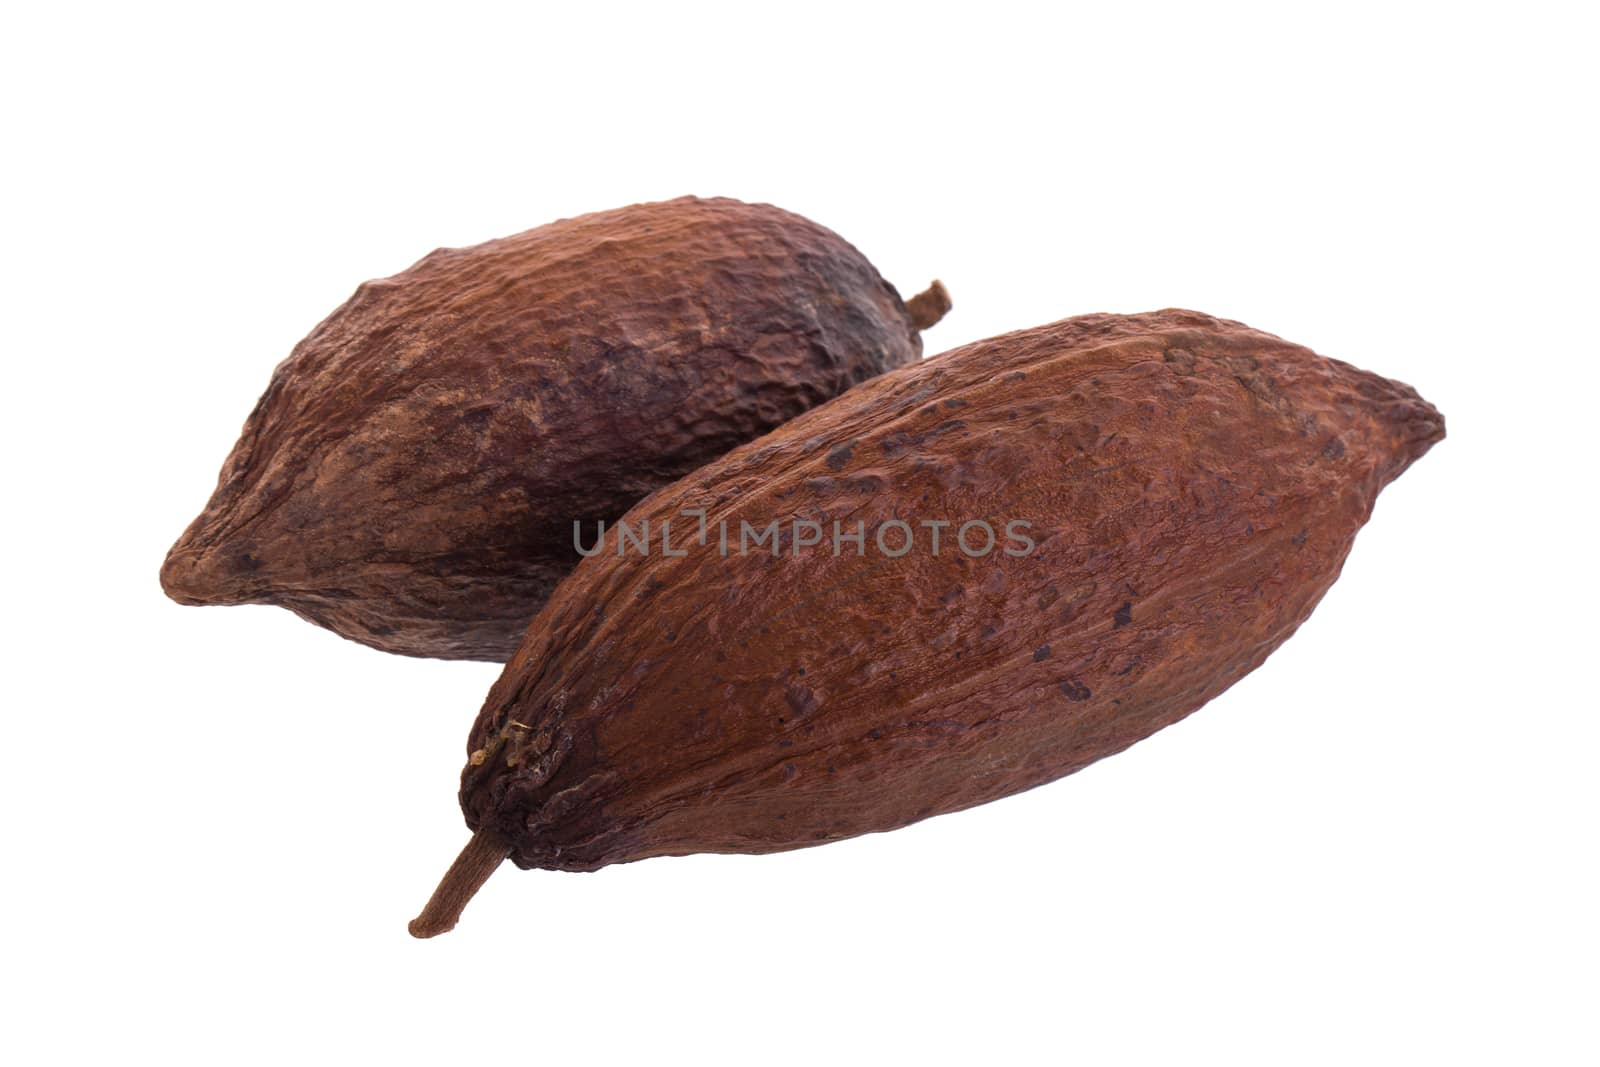 Dried cocoa pod on a white background by kaiskynet